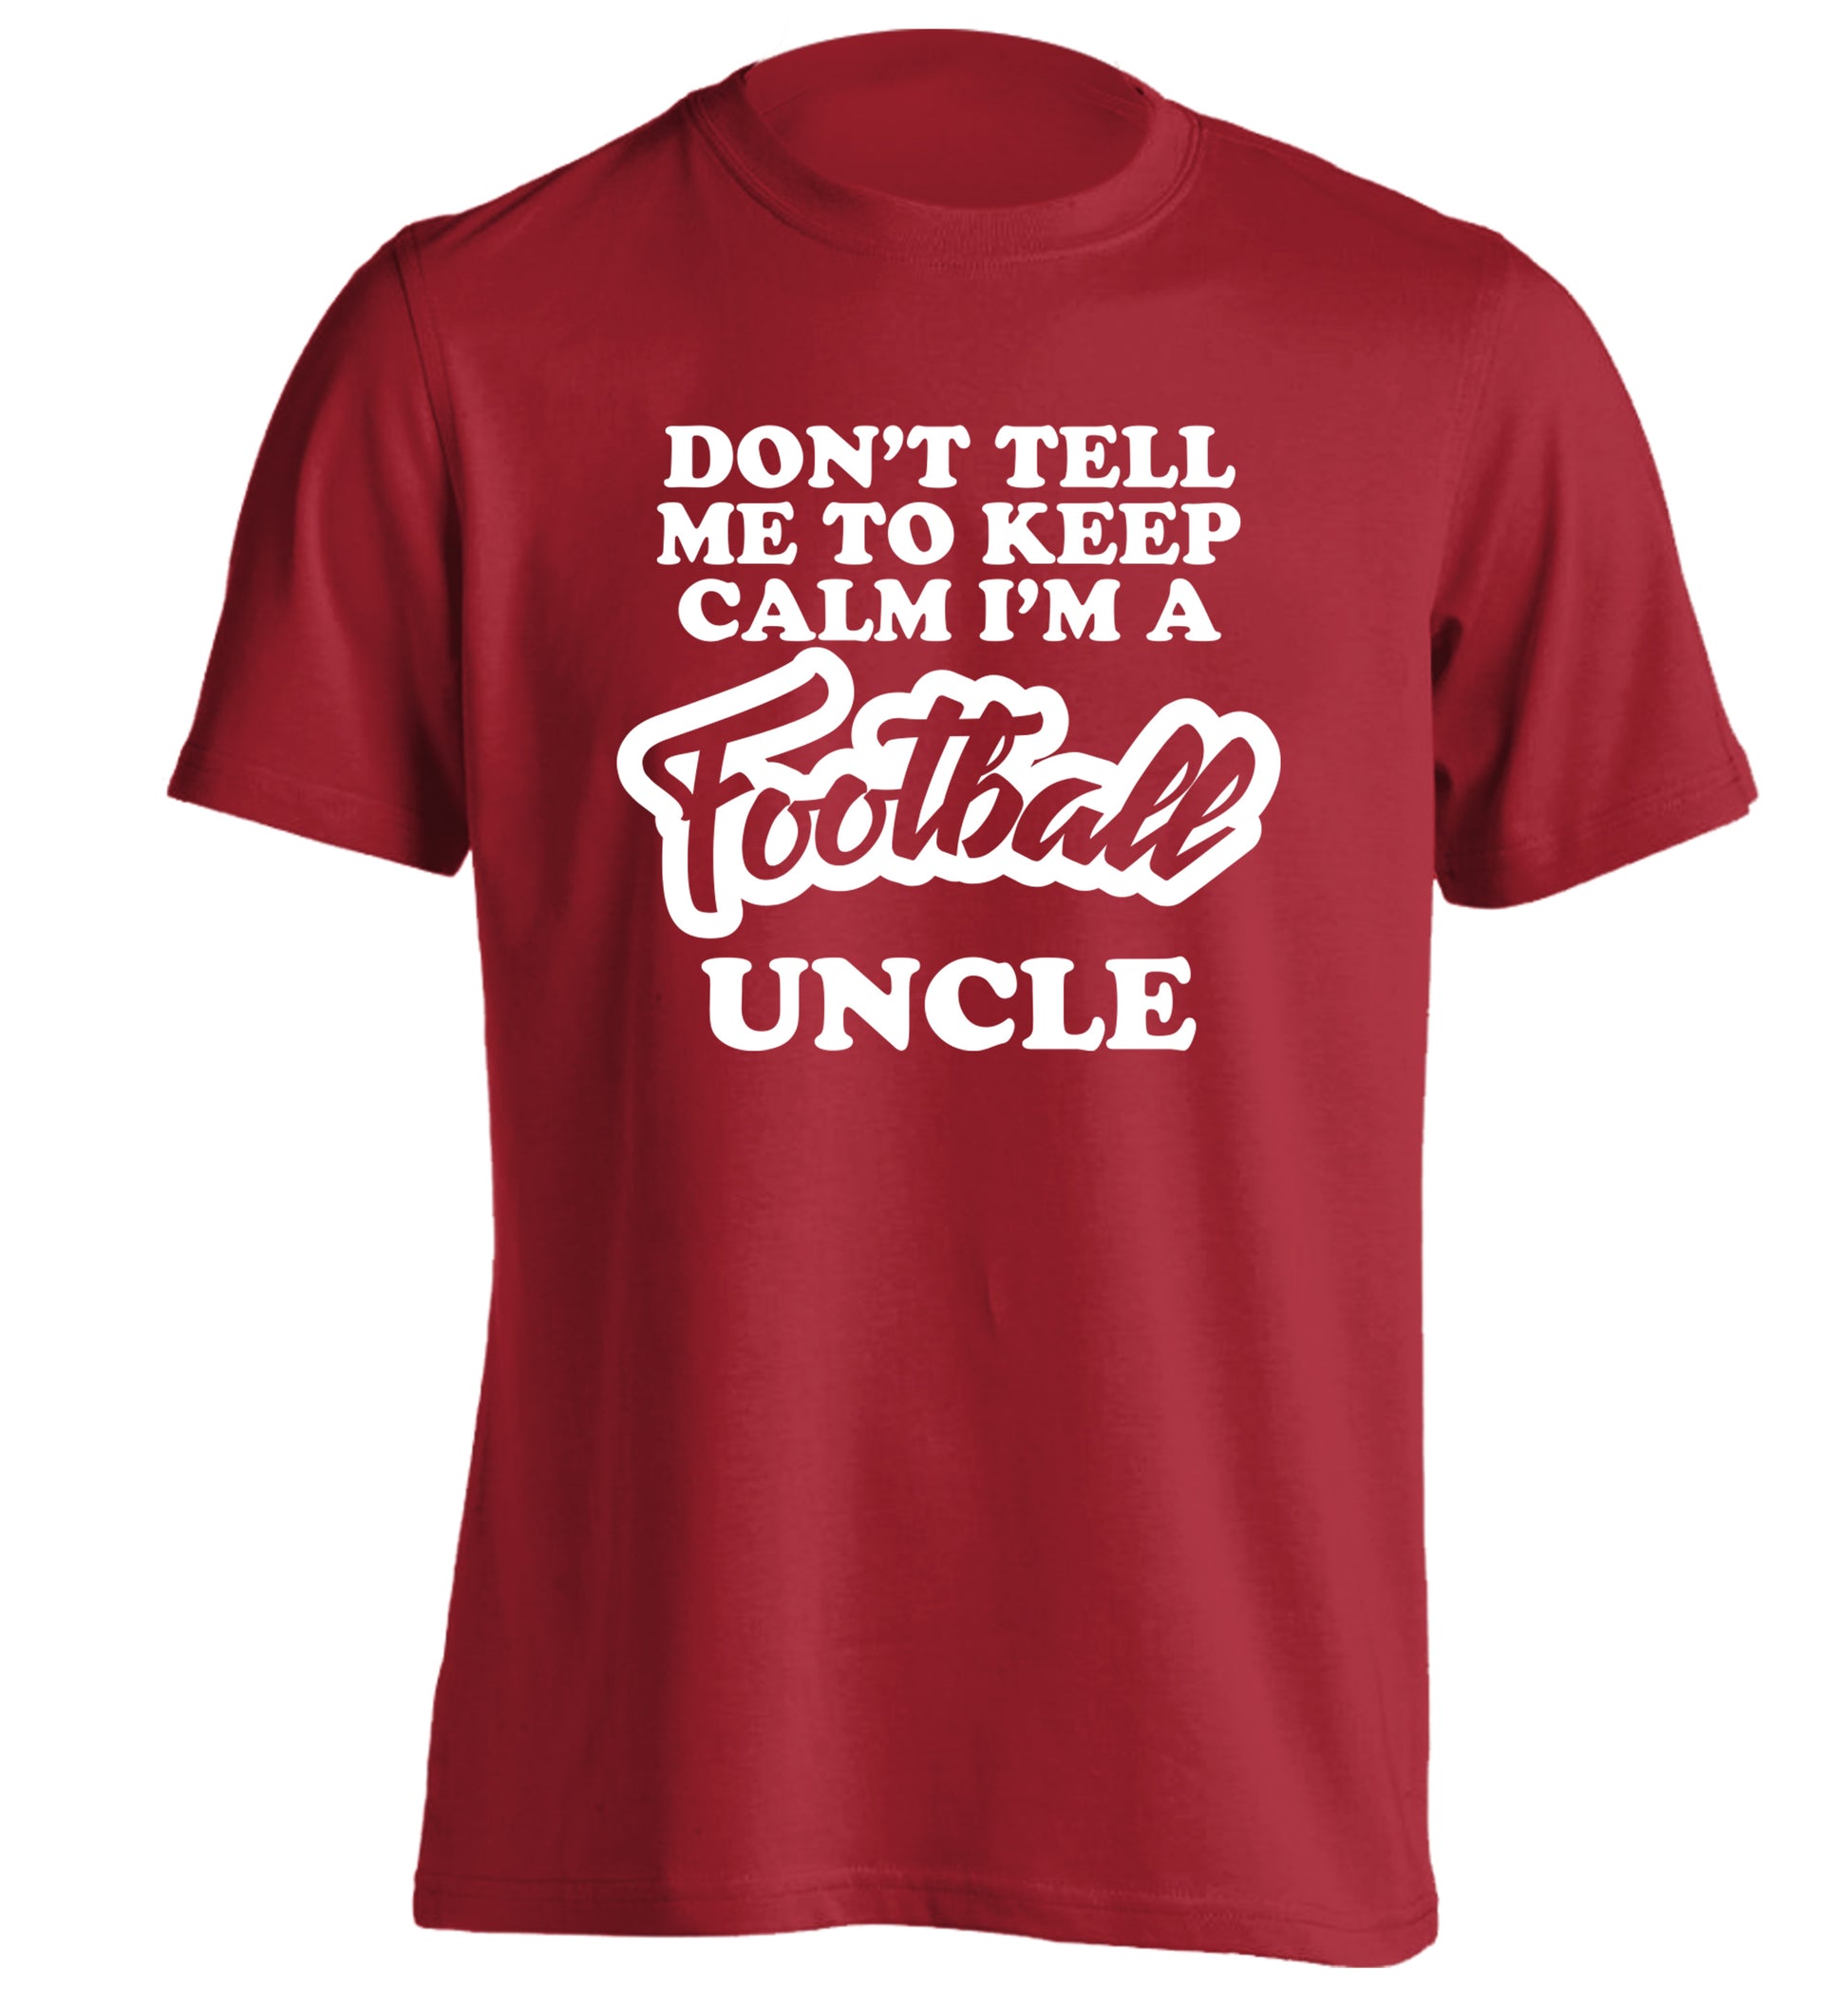 Don't tell me to keep calm I'm a football uncle adults unisexred Tshirt 2XL